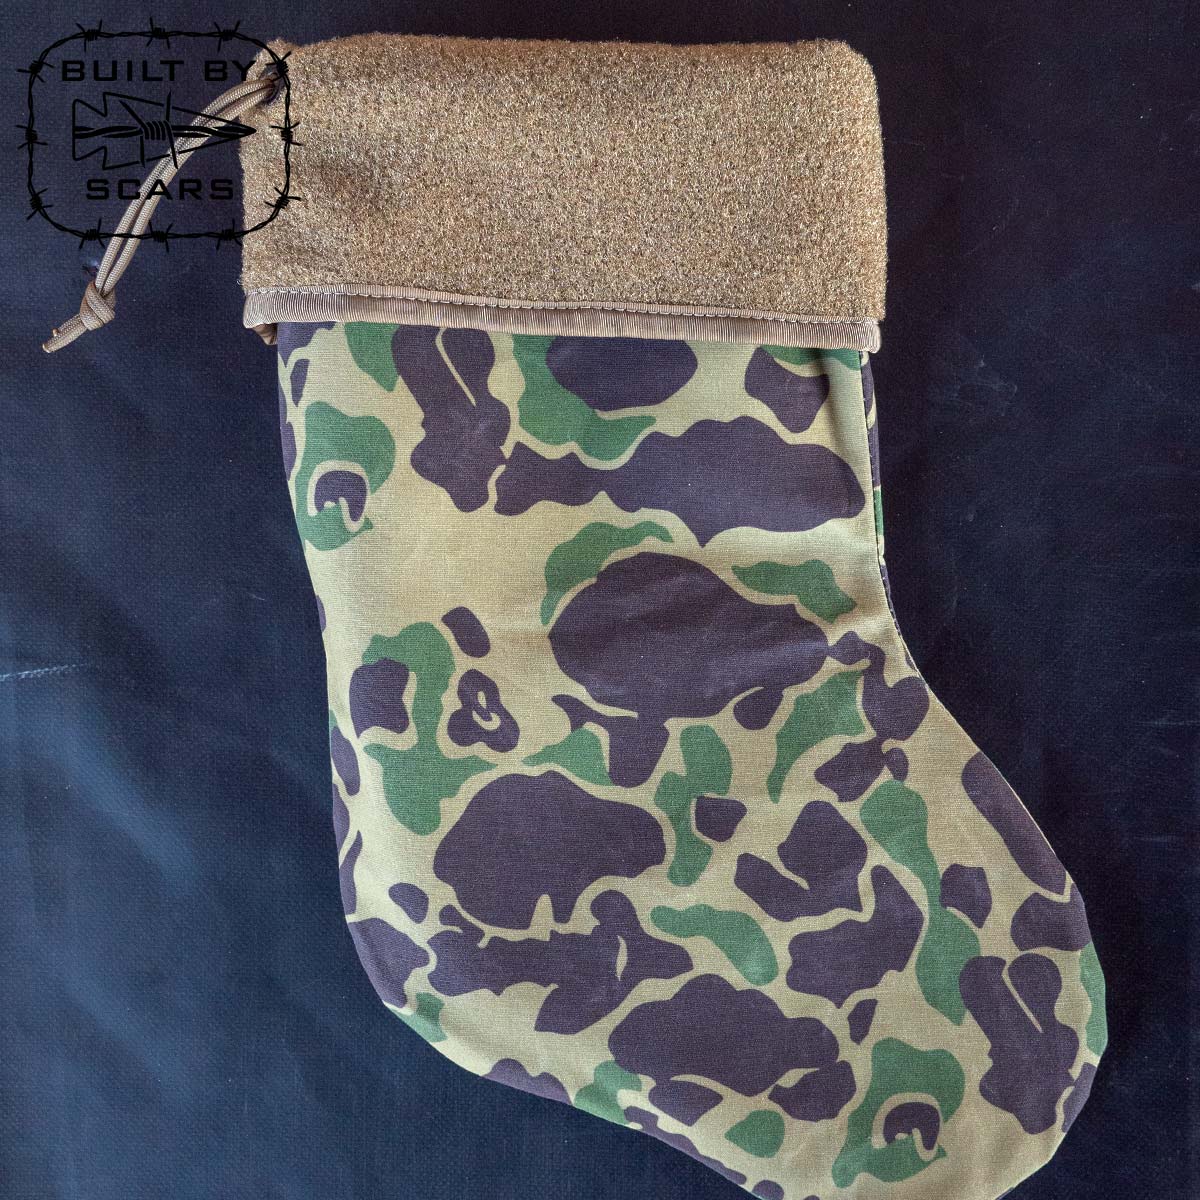 X-Mas Stocking - Built by SCARS